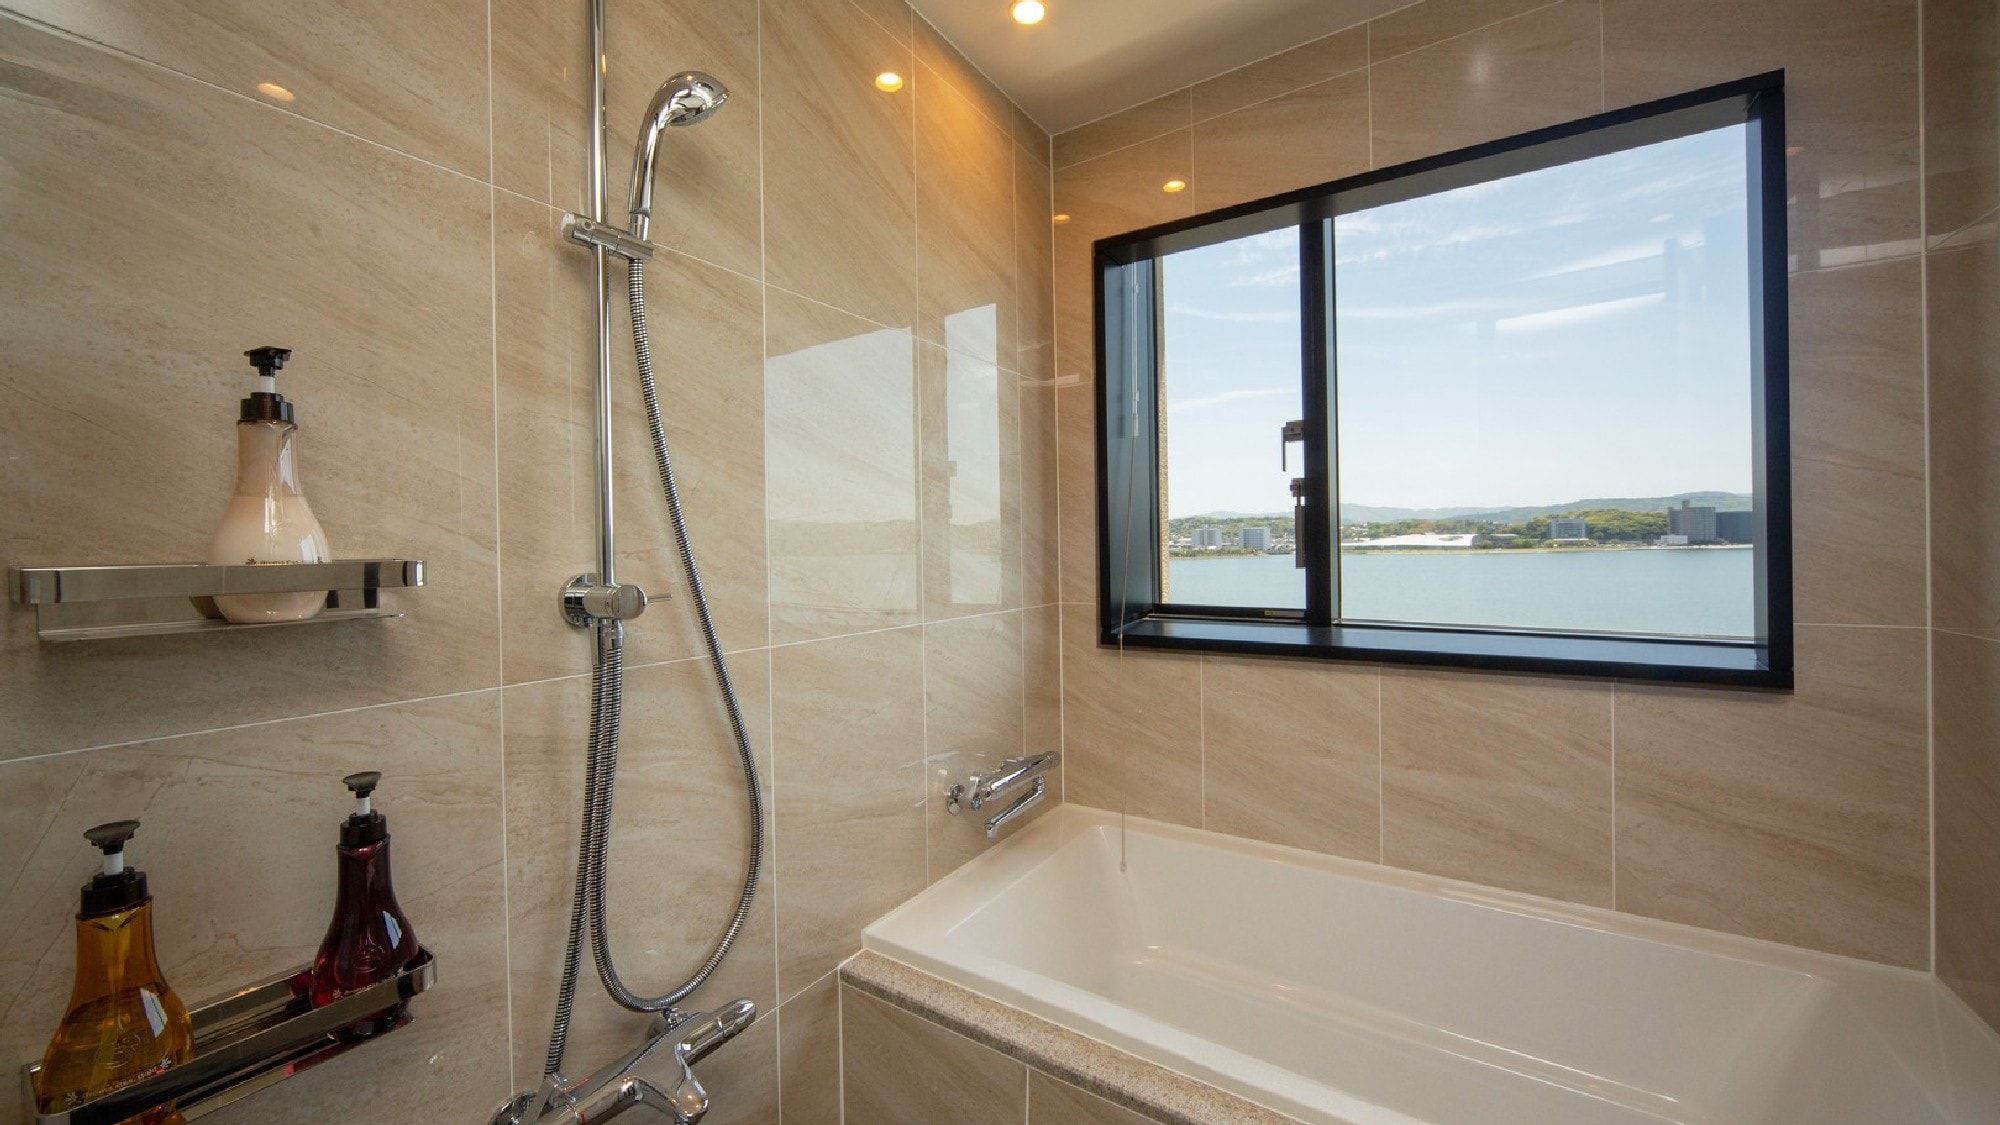 The bath and toilet are separate types. A panoramic view of Lake Shinji from the window. Executive Twin